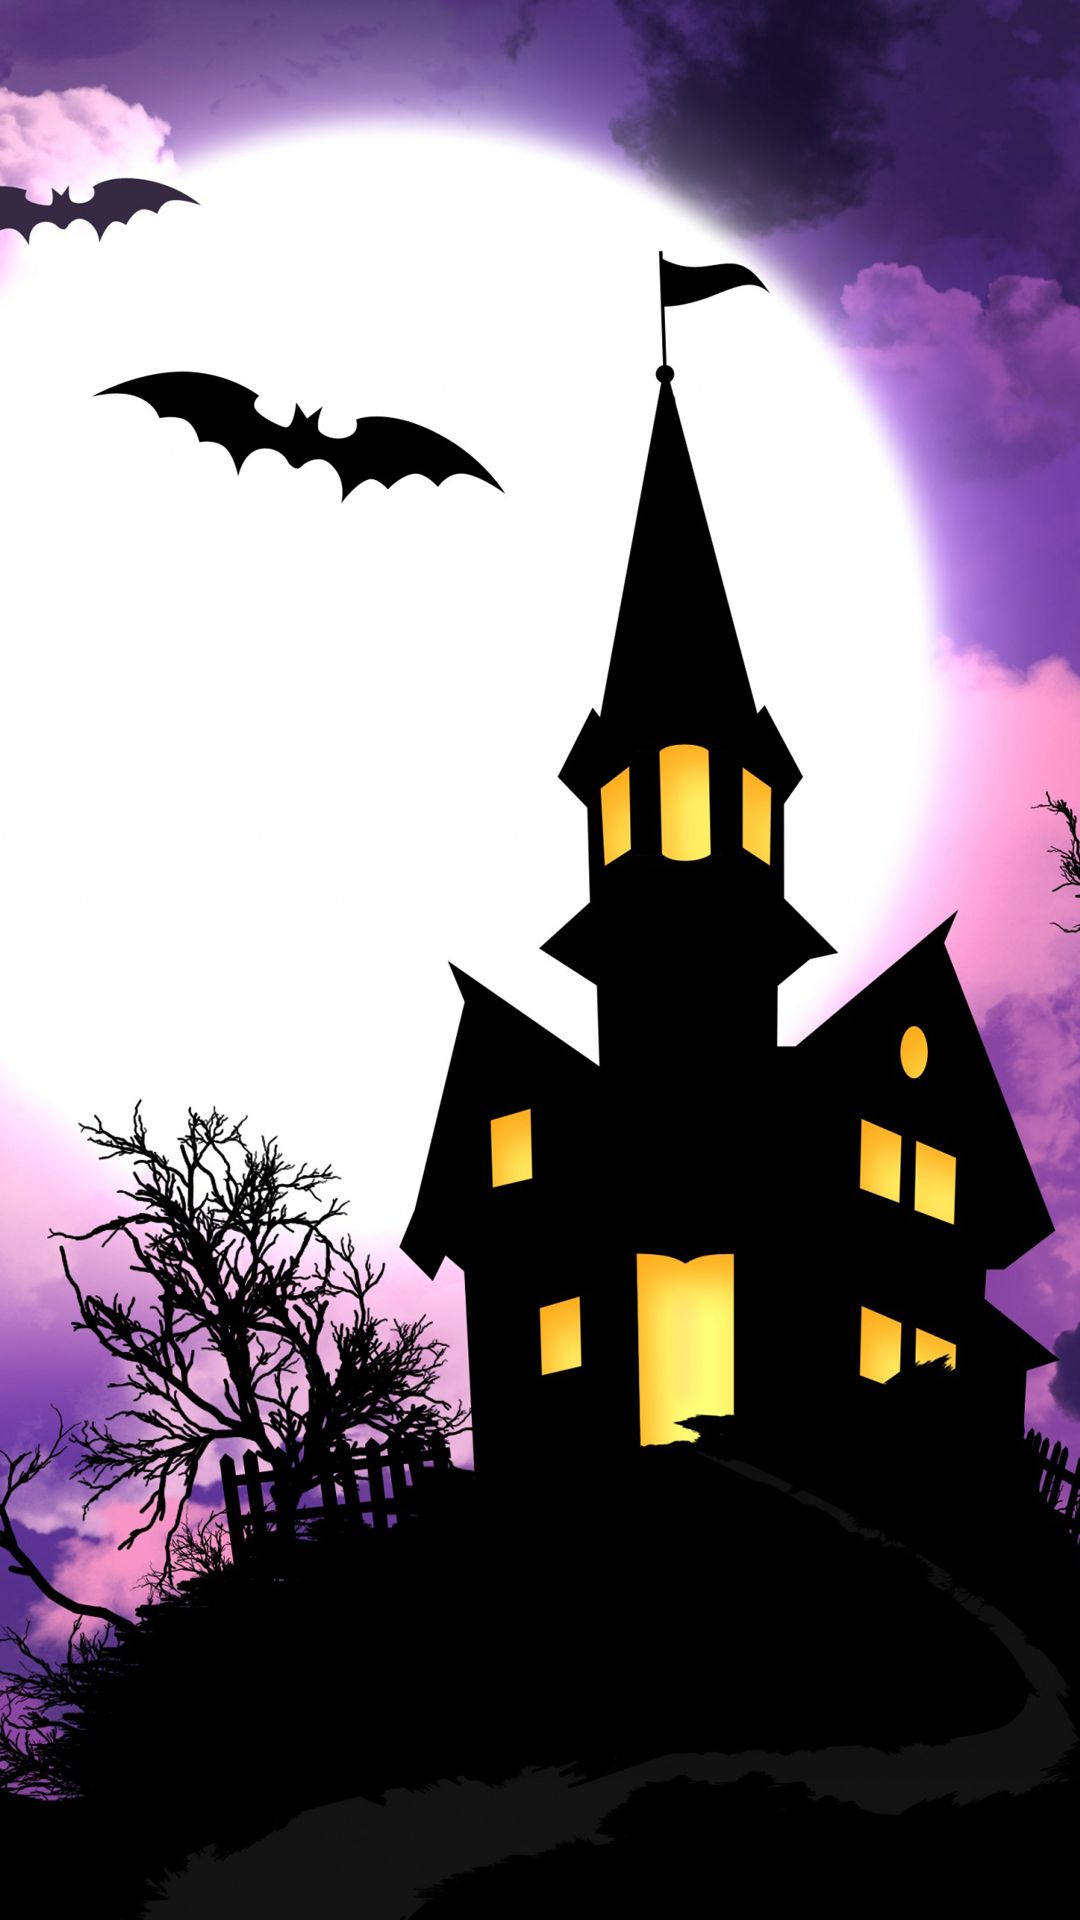 Spooky house HalloweenK wallpaper, free and easy to download